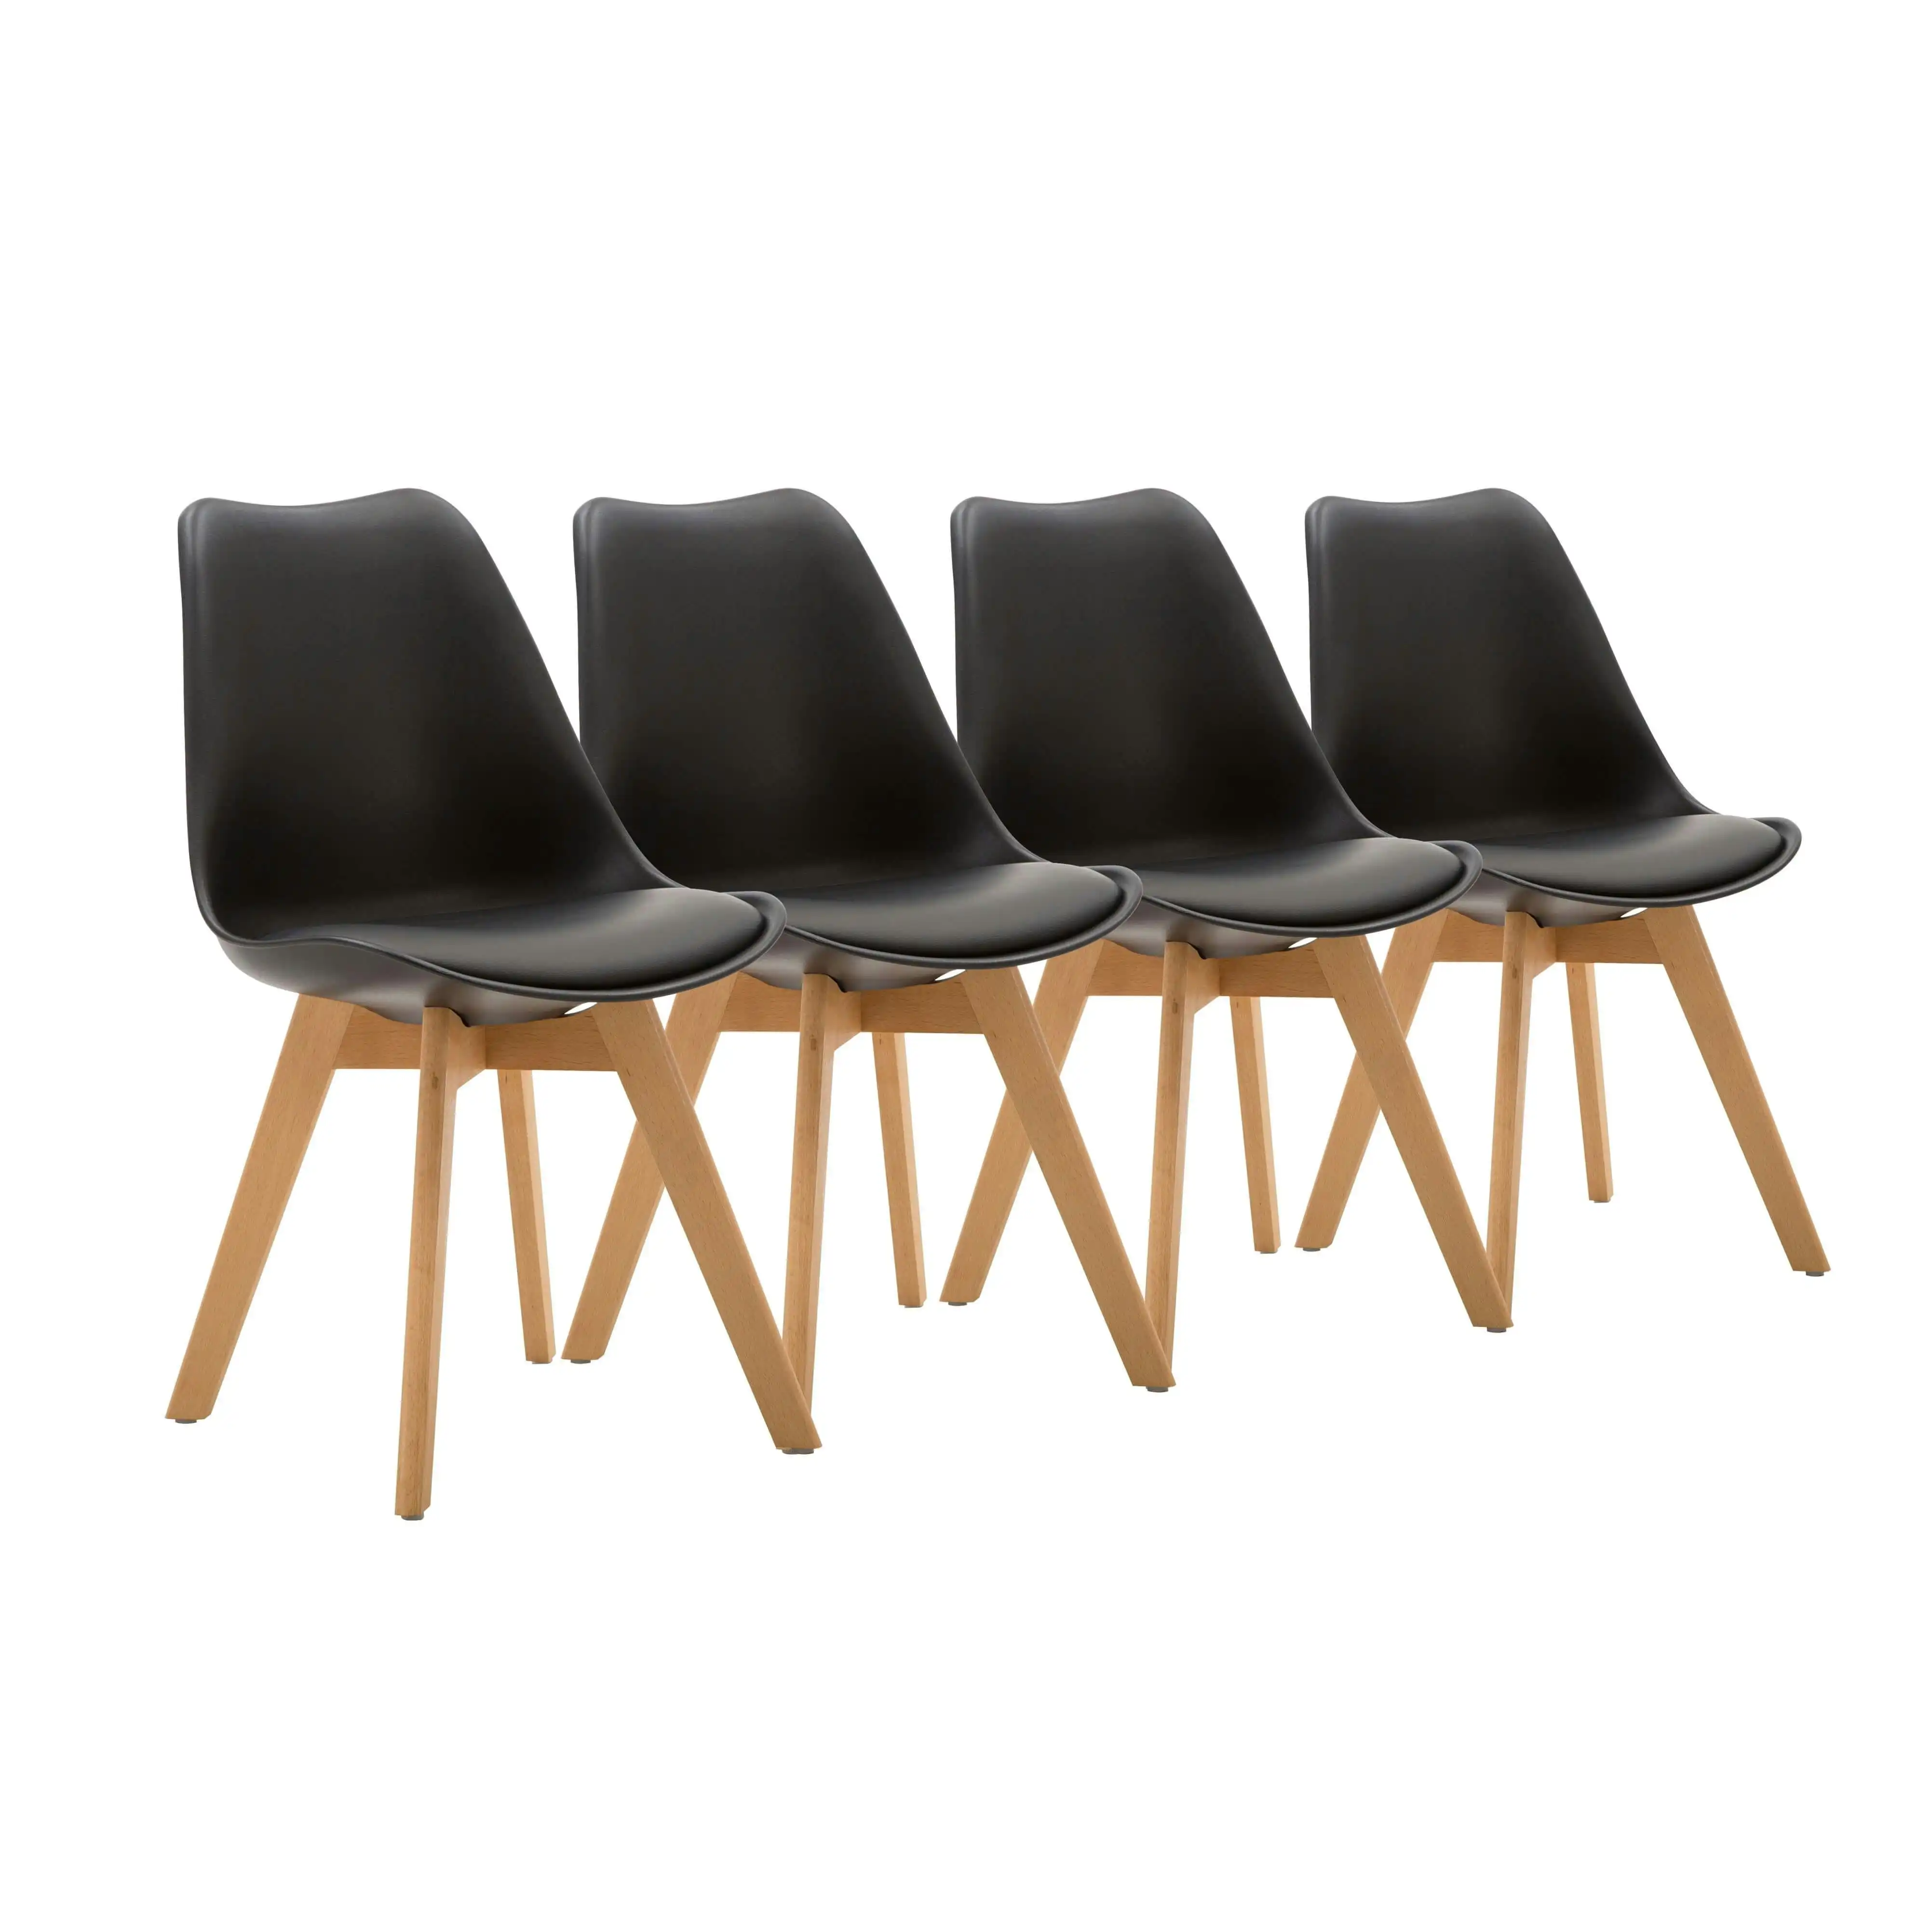 Chotto - Ando Dining Chairs - Black x 4